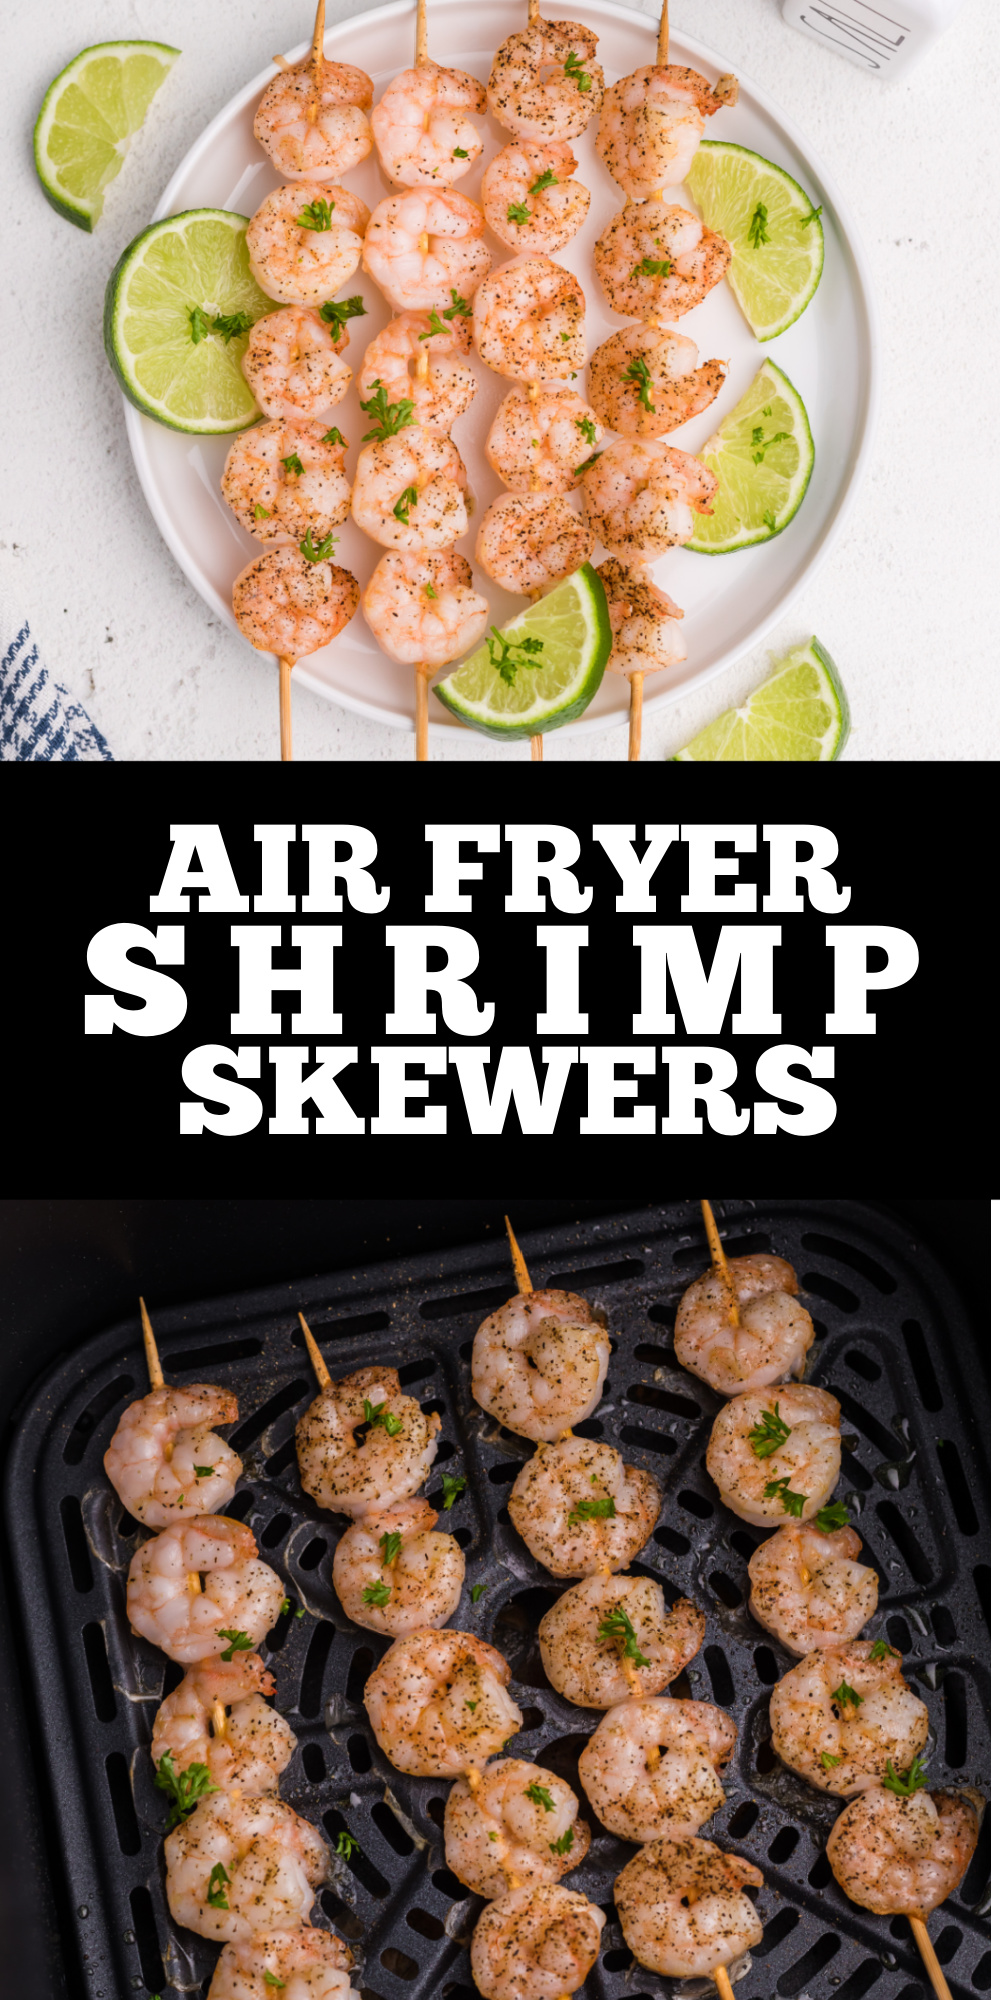 Air fryer shrimp skewers are so good! Lightly seasoned and tossed in the air fryer for a quick and easy snack, salad topper, or easy appetizer. If you're looking for a quick dish, this is it! 